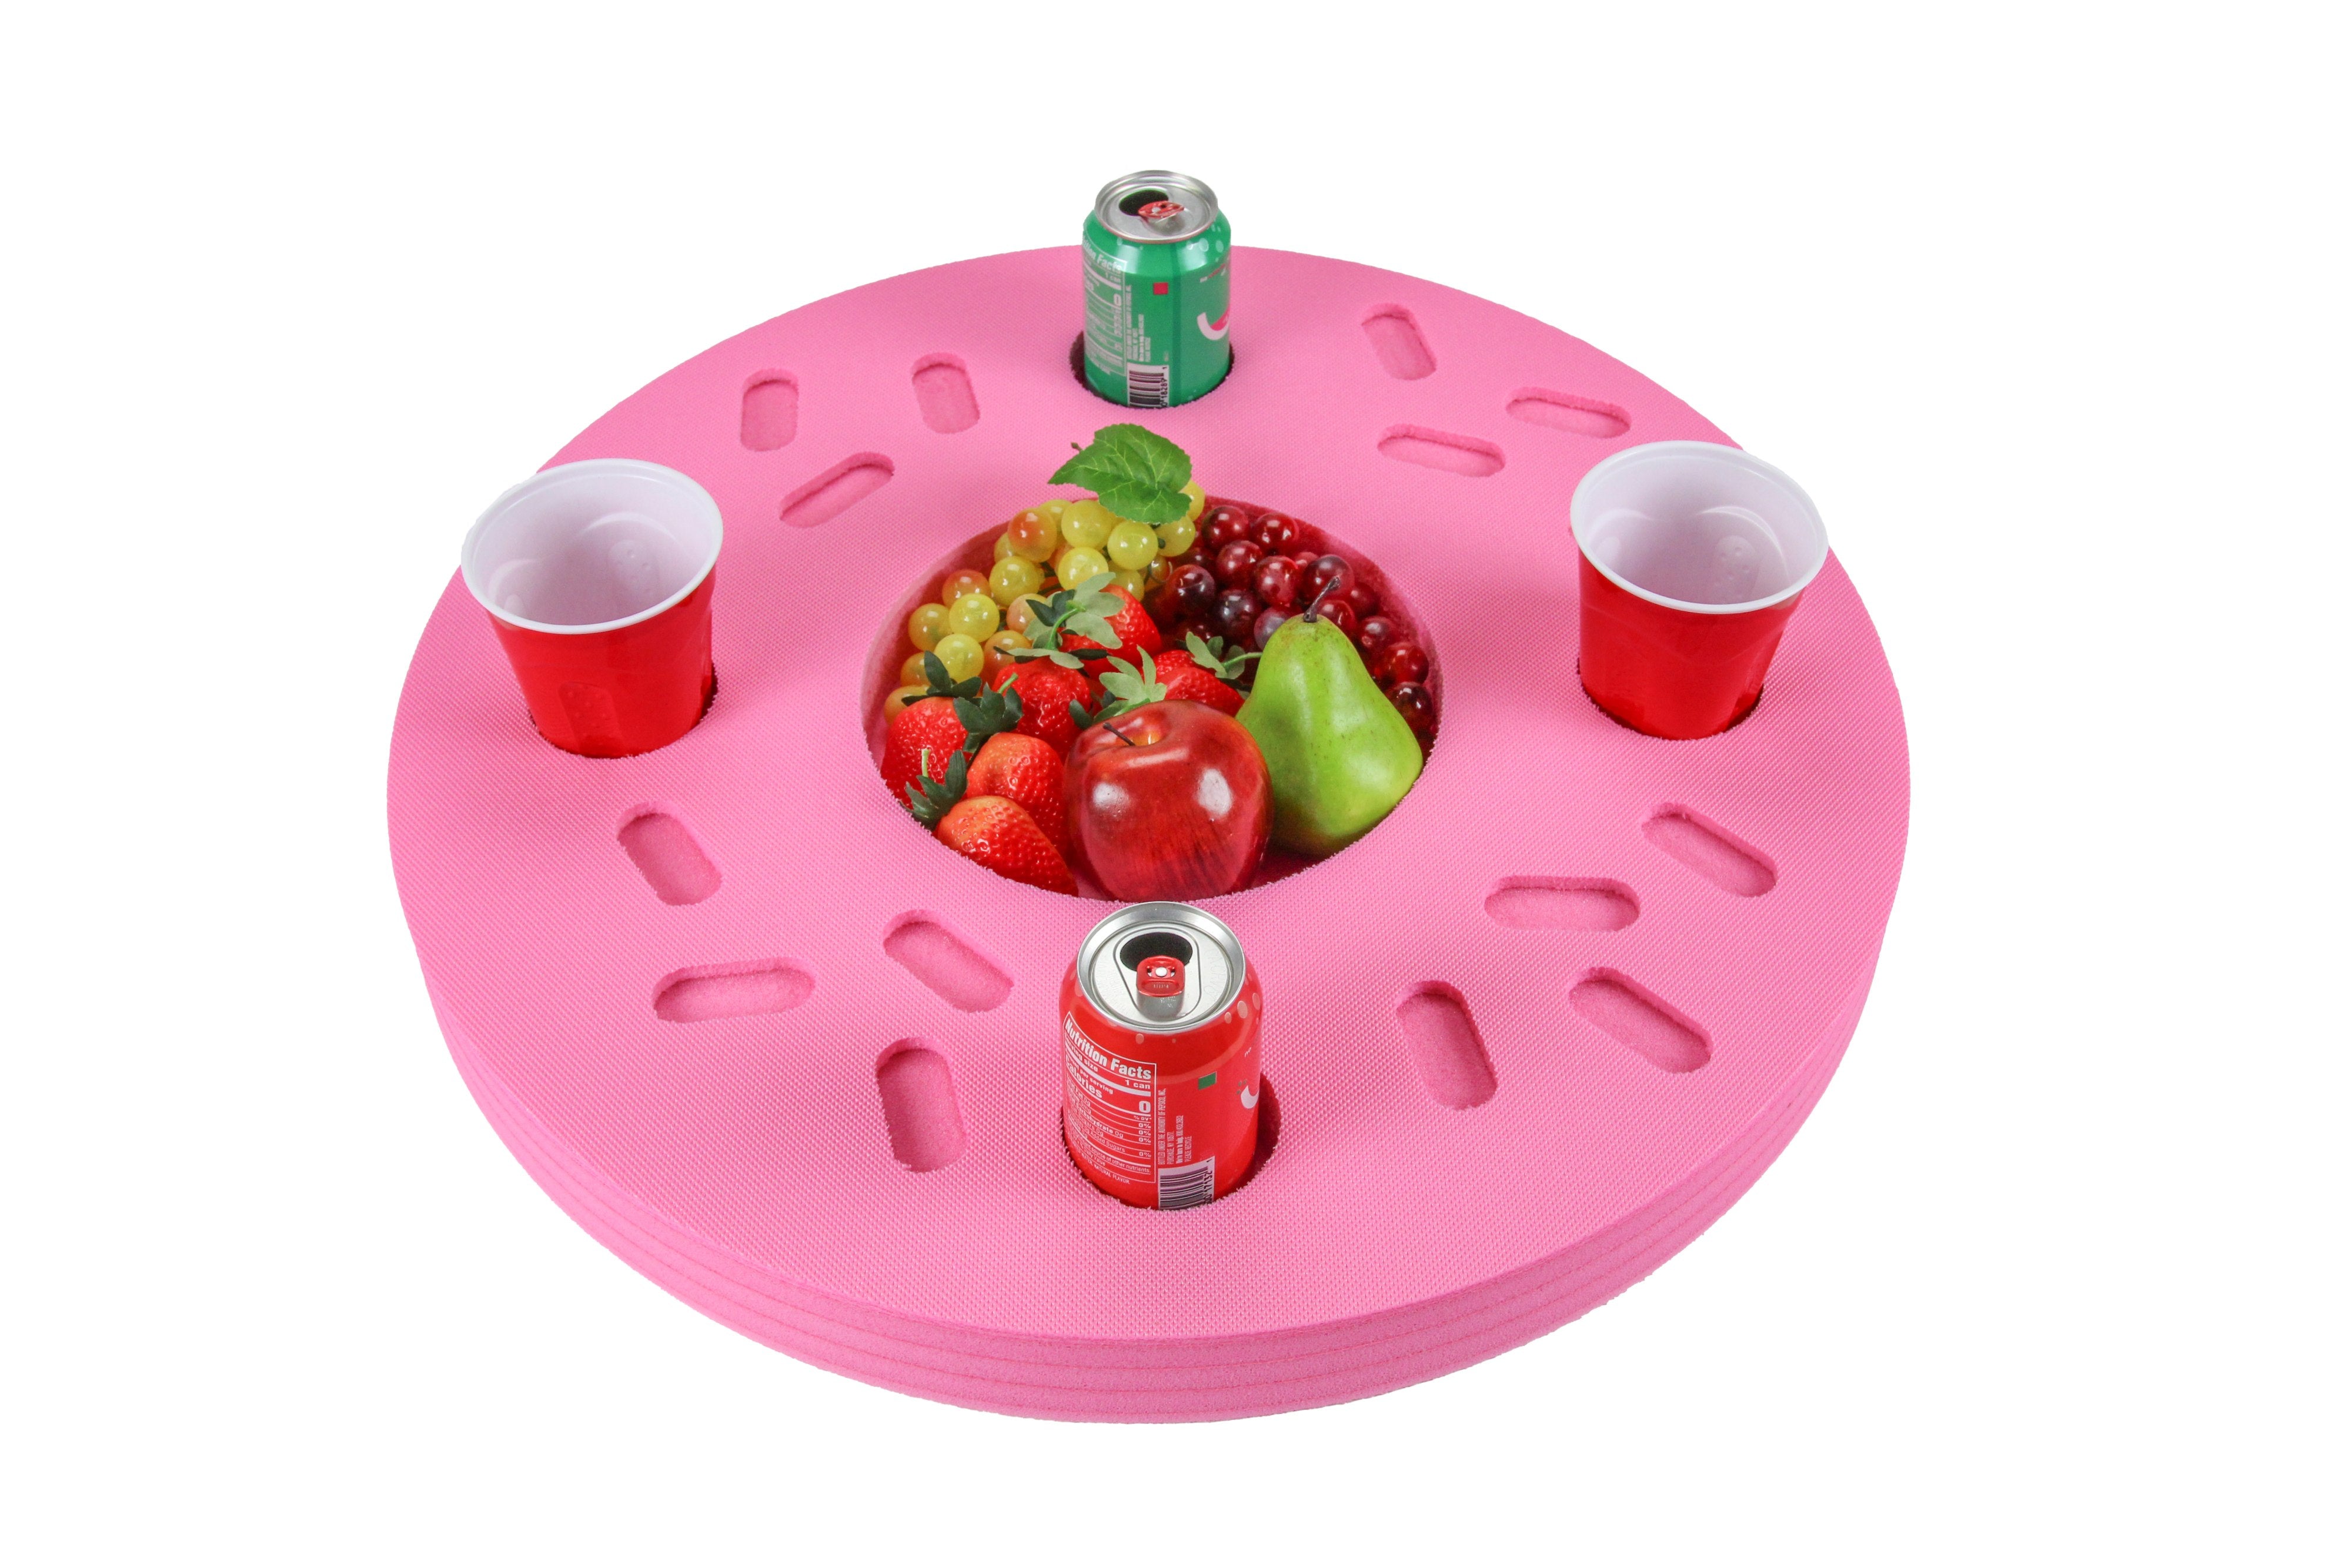 Donut Shape Drink Holder Doughnut Refreshment Table Tray PoolBeach Party Float Lounge Durable Foam 5 Compartment UV Resistant Cup Holders 2 Feet